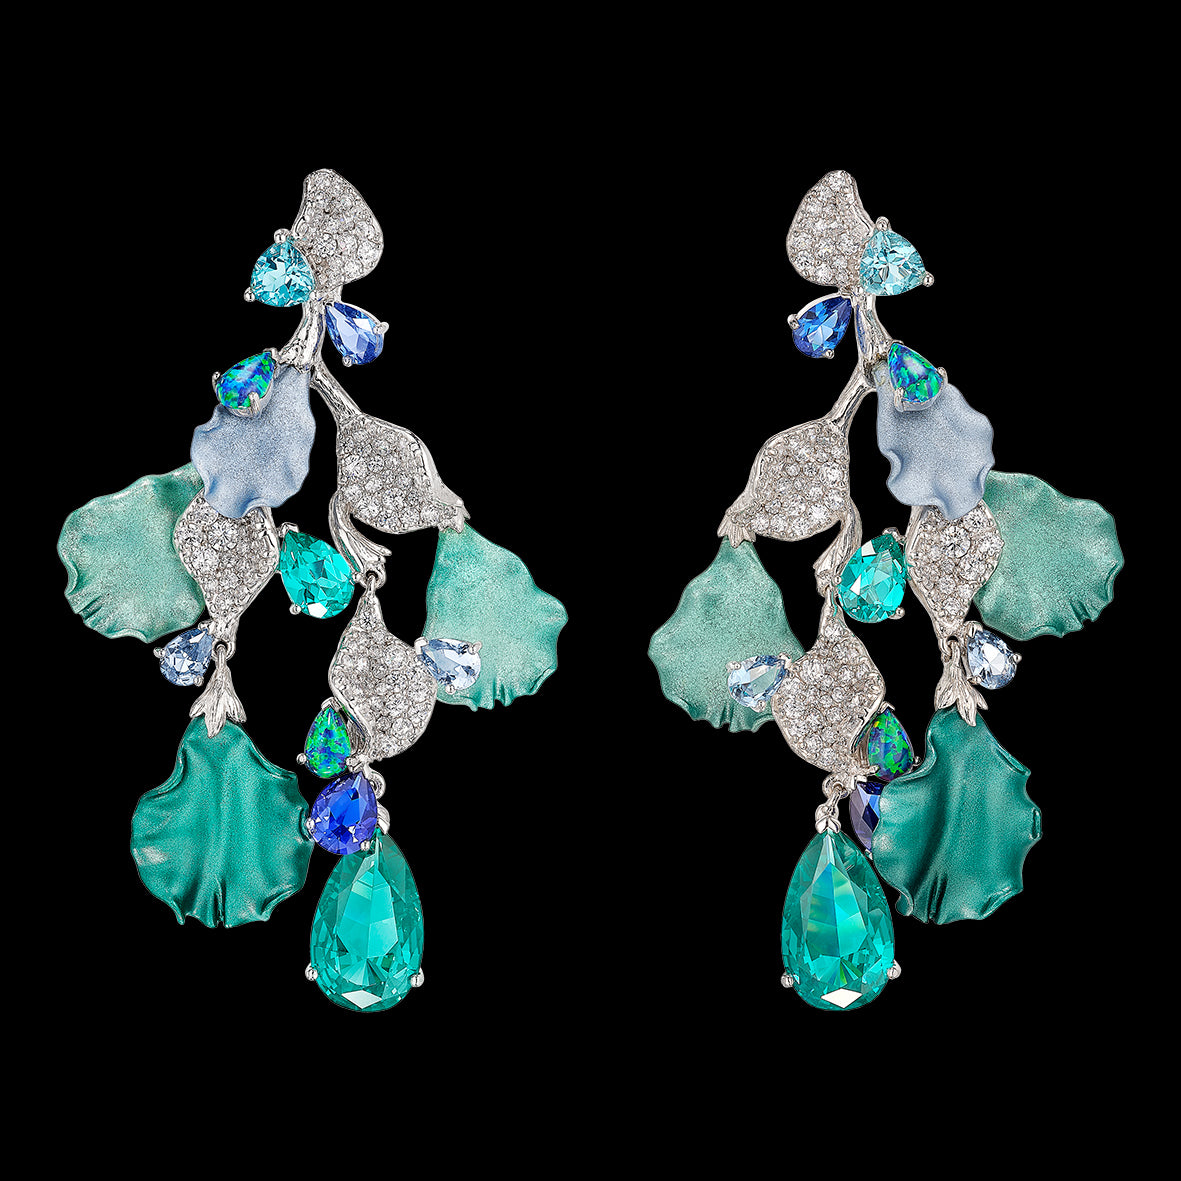 Paraiba Poseidon Earrings, Earring, Anabela Chan Joaillerie - Fine jewelry with laboratory grown and created gemstones hand-crafted in the United Kingdom. Anabela Chan Joaillerie is the first fine jewellery brand in the world to champion laboratory-grown and created gemstones with high jewellery design, artisanal craftsmanship and a focus on ethical and sustainable innovations.